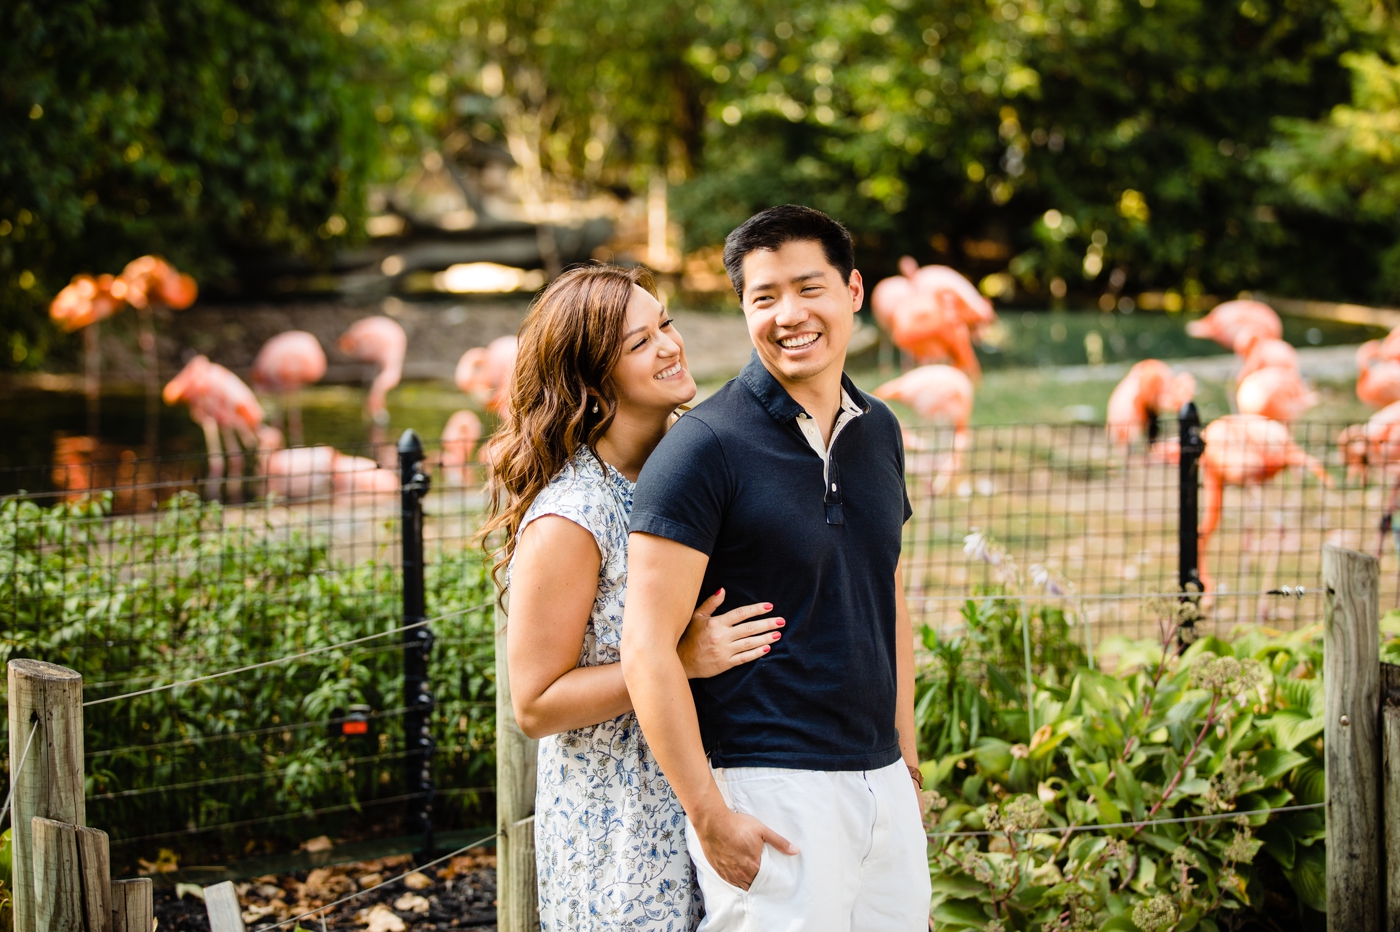 Engagement photos at the Columbus Zoo - couple with flamingoes